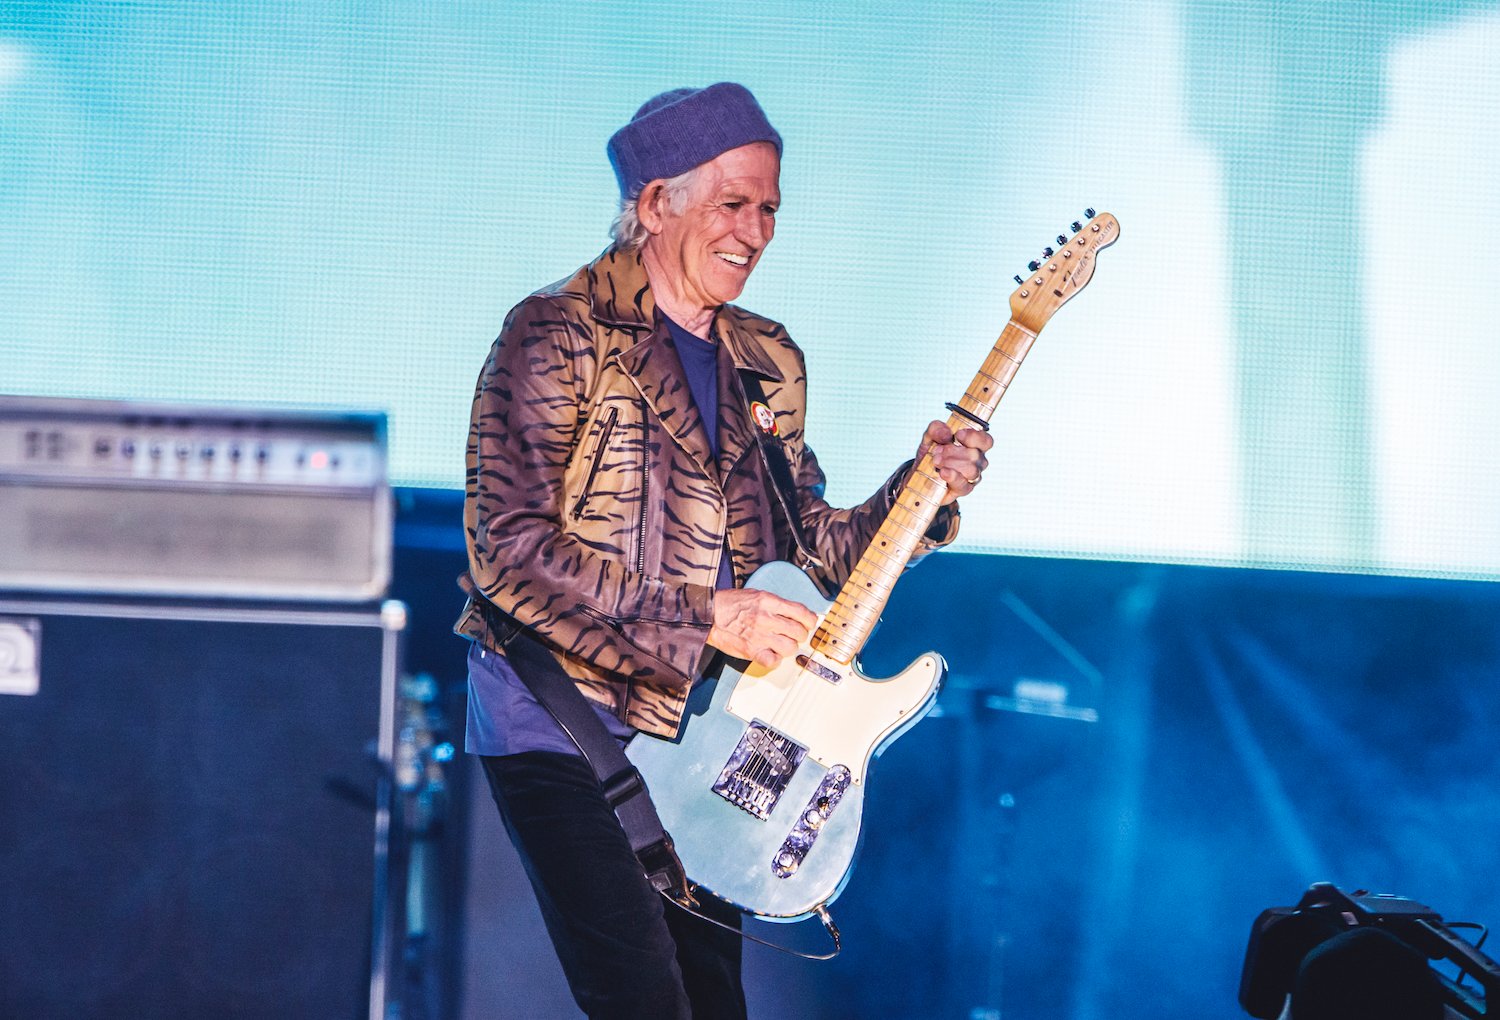 Keith Richards performs with The Rolling Stones in Madrid, Spain